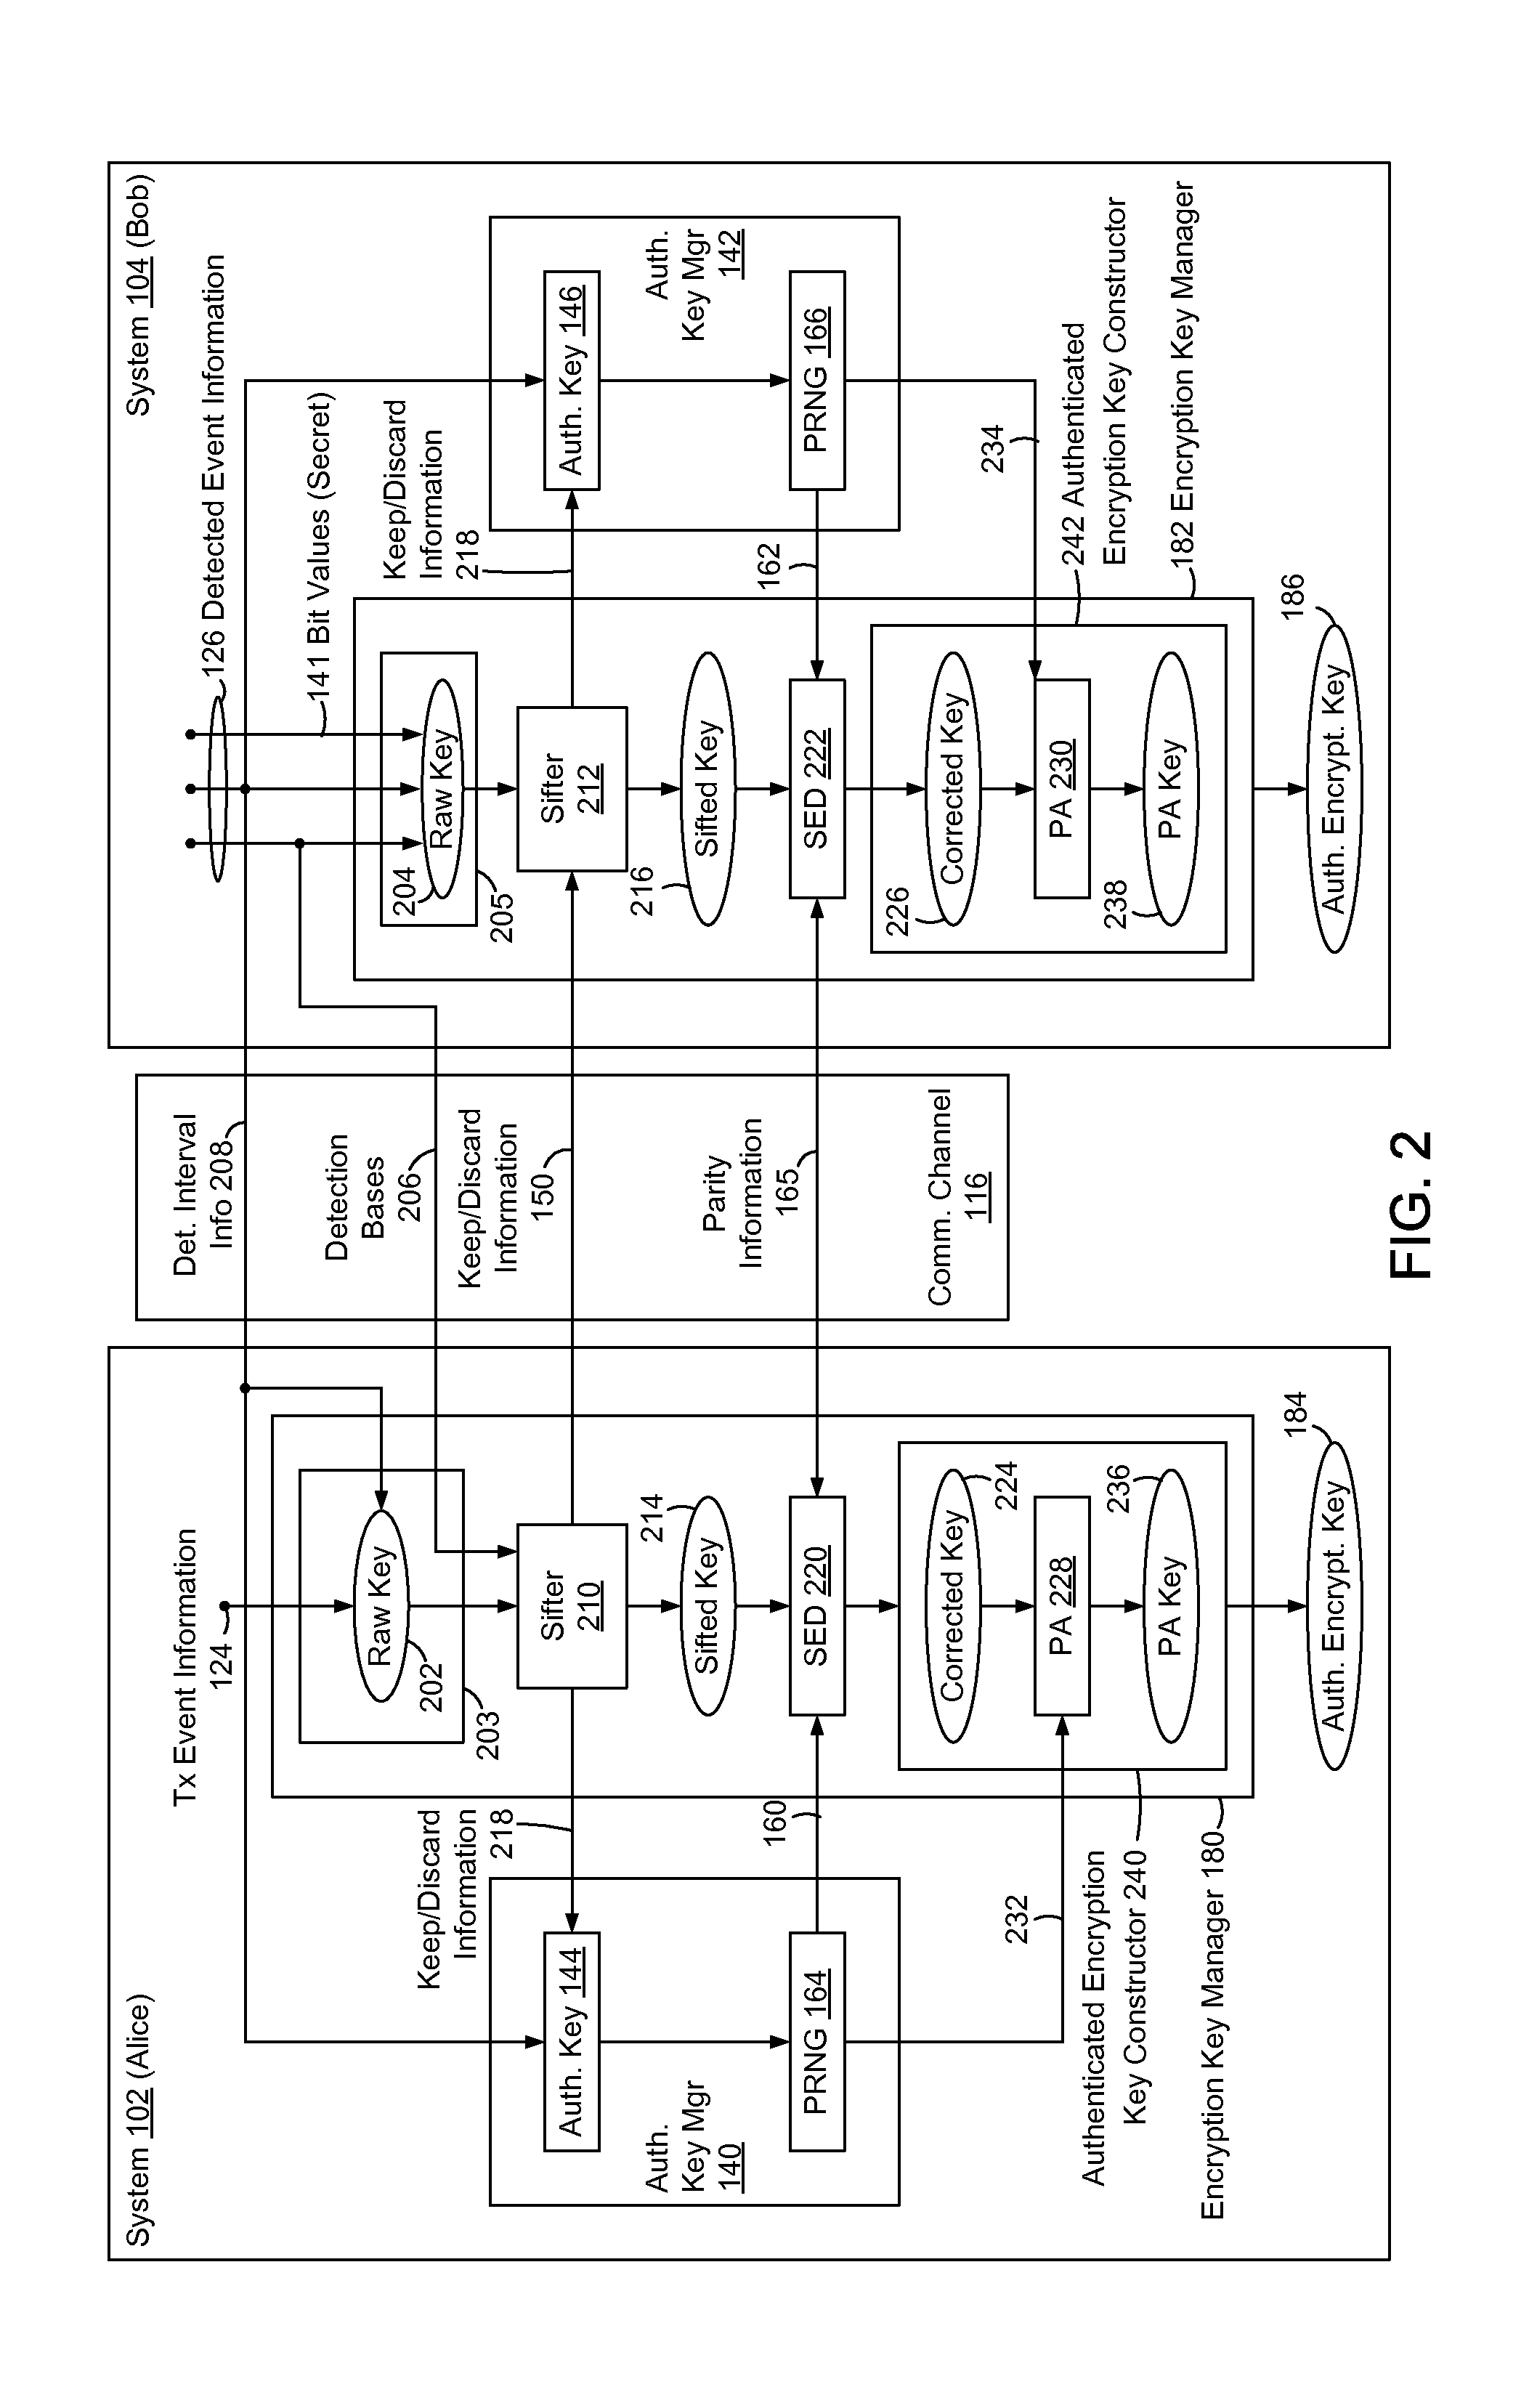 Embedded Authentication Protocol for Quantum Key Distribution Systems